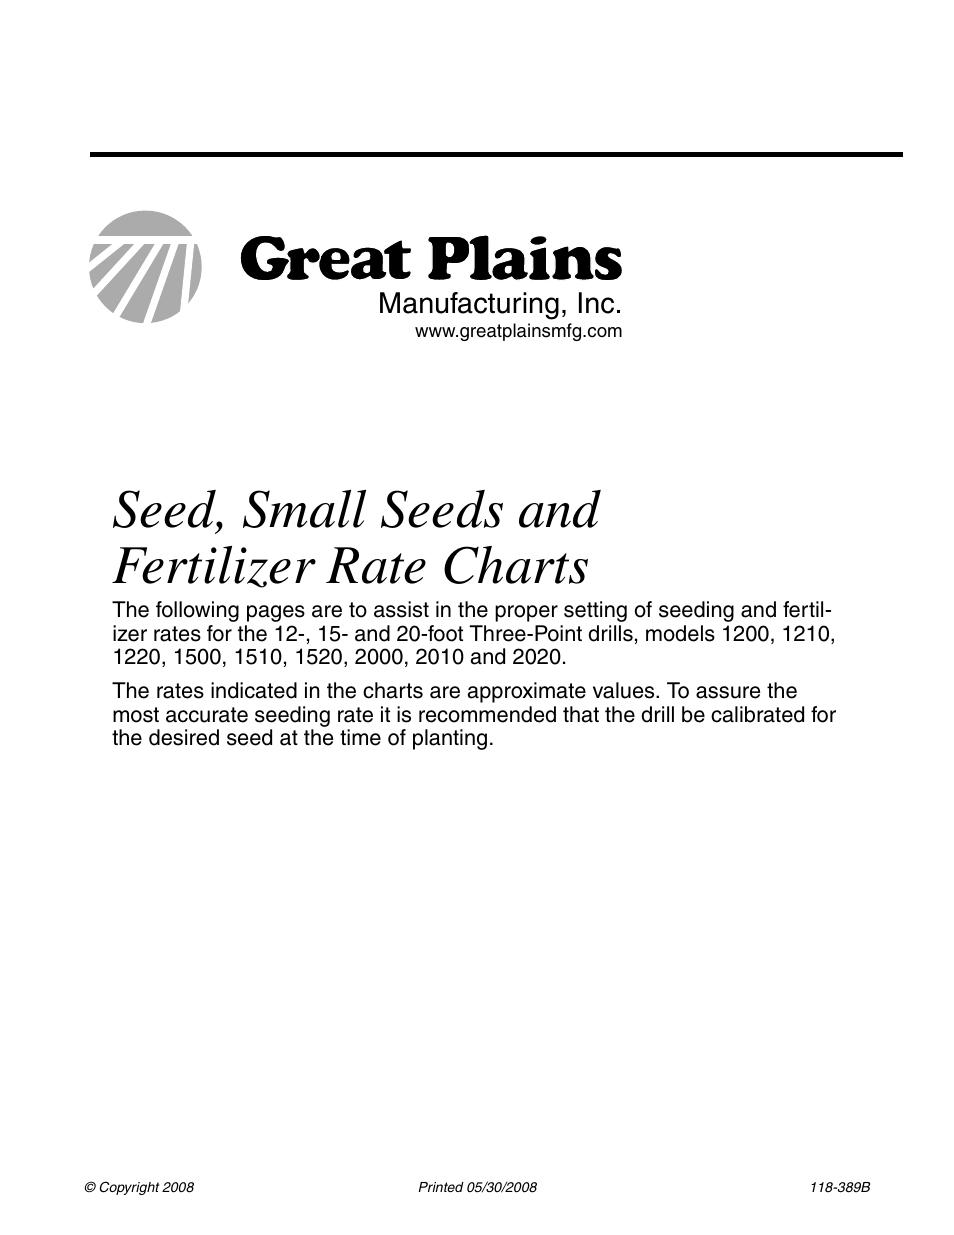 Great Plains Drill Seed Chart